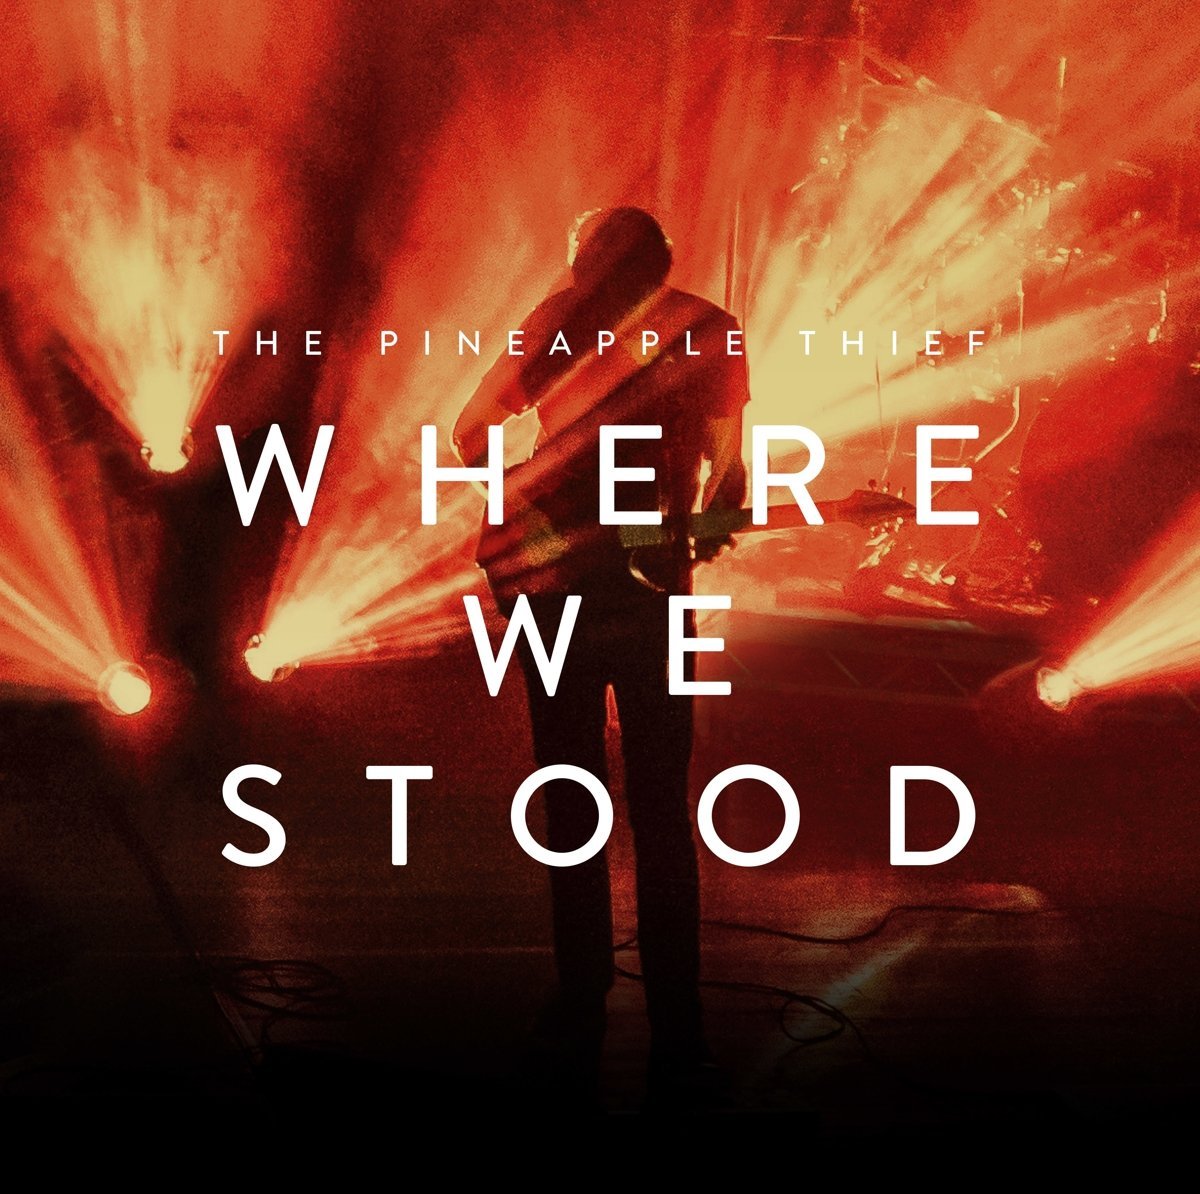 The Pineapple Thief - Where We Stood (In Concert) (2017) [FLAC 24bit/48kHz]